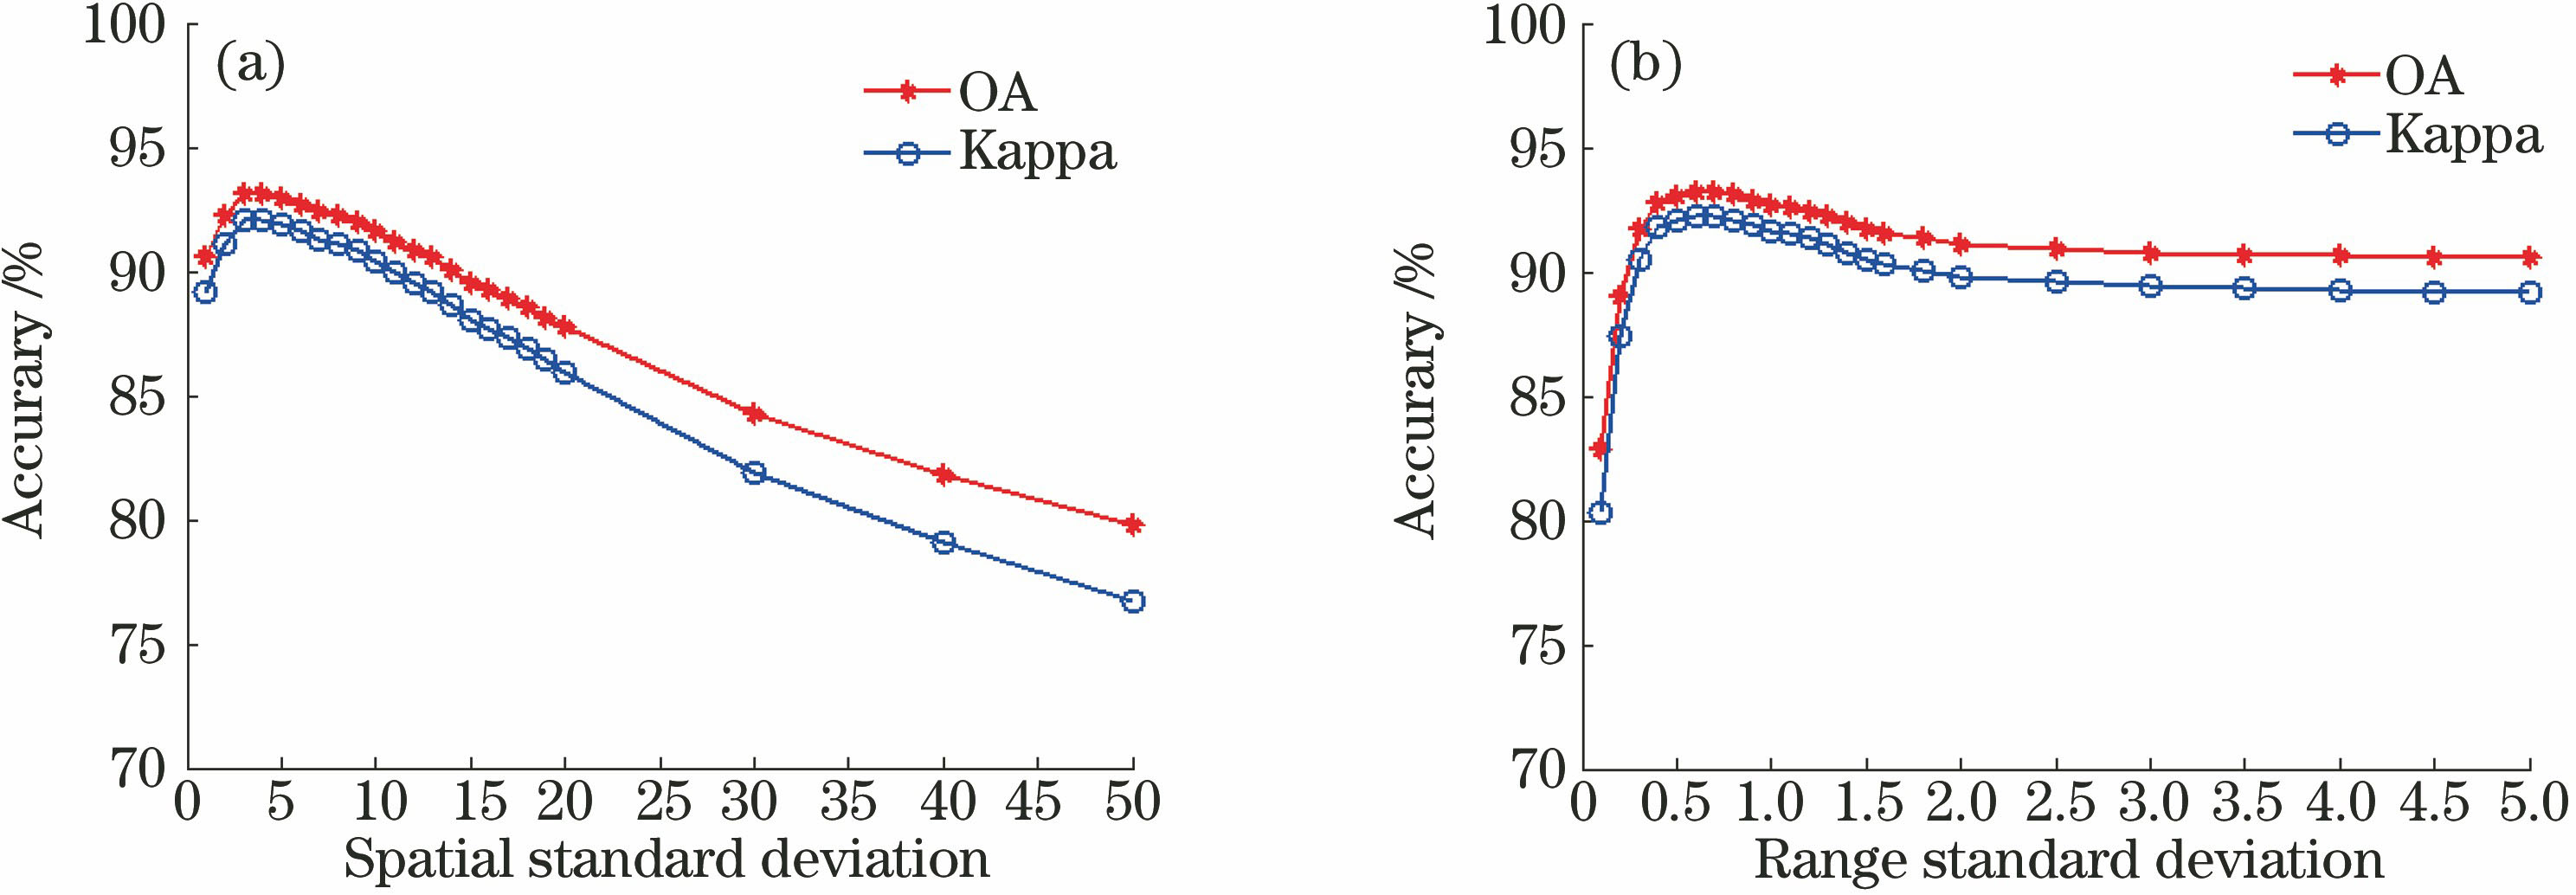 Optimization for manifold filtering coefficient of Indian Pines data sets. (a) Spatial deviation coefficient σs; (b) range deviation coefficient σr